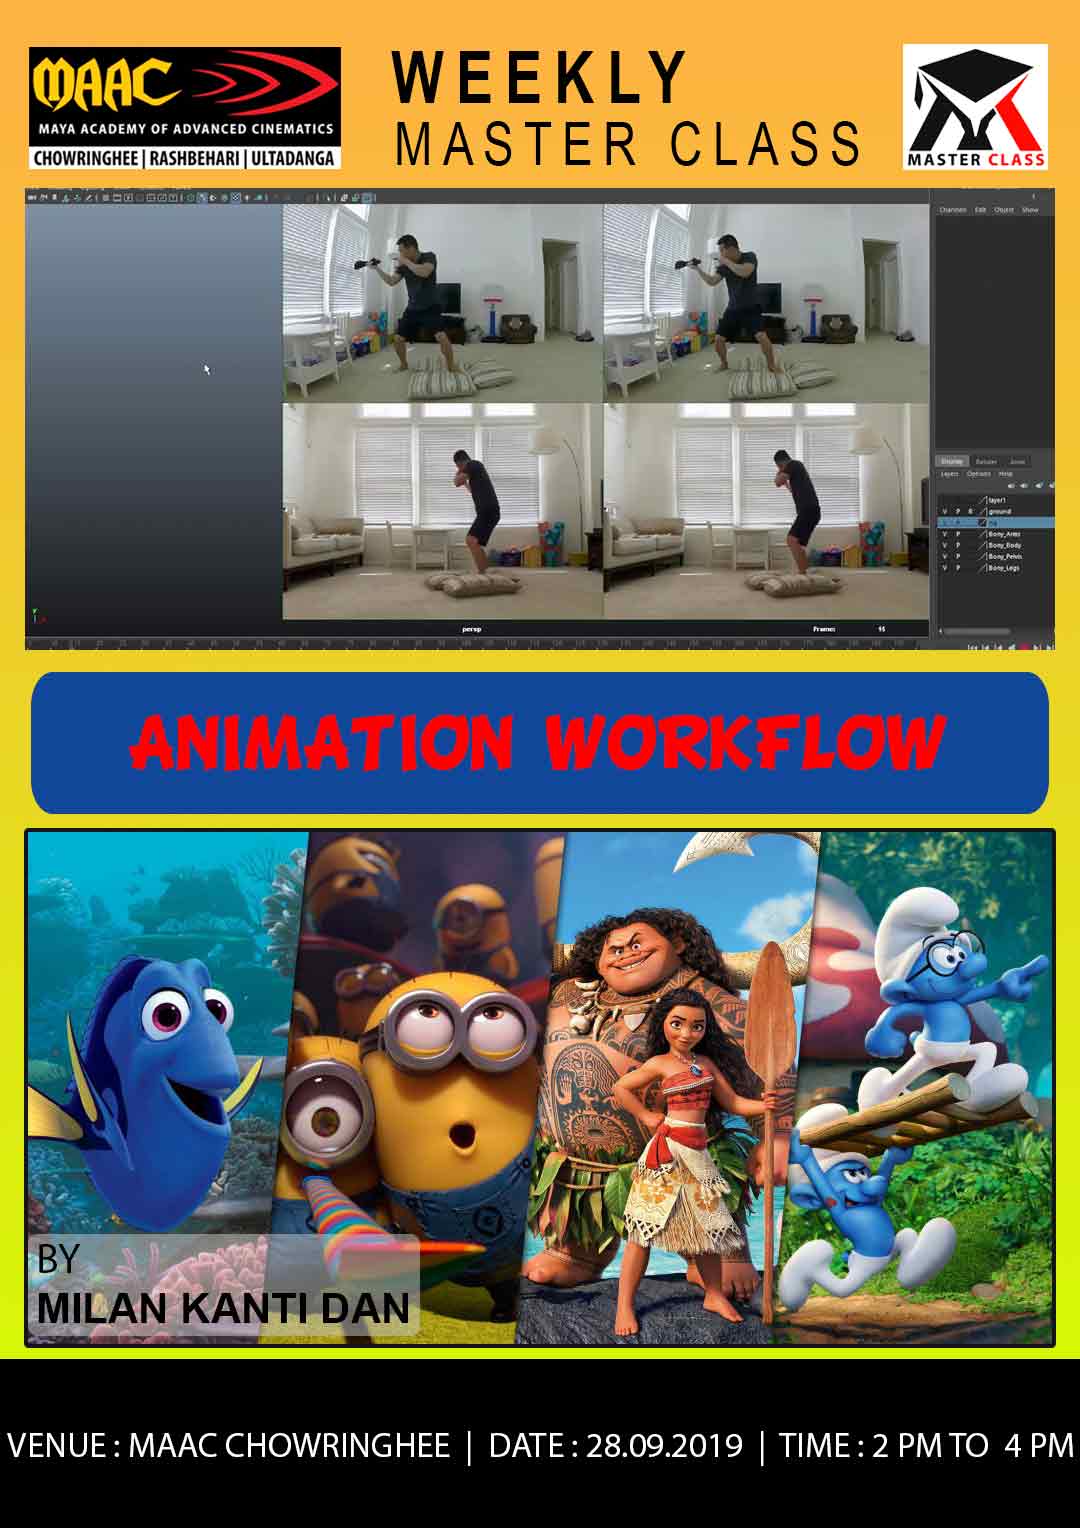 Weekly Master Class on Animation Workflow